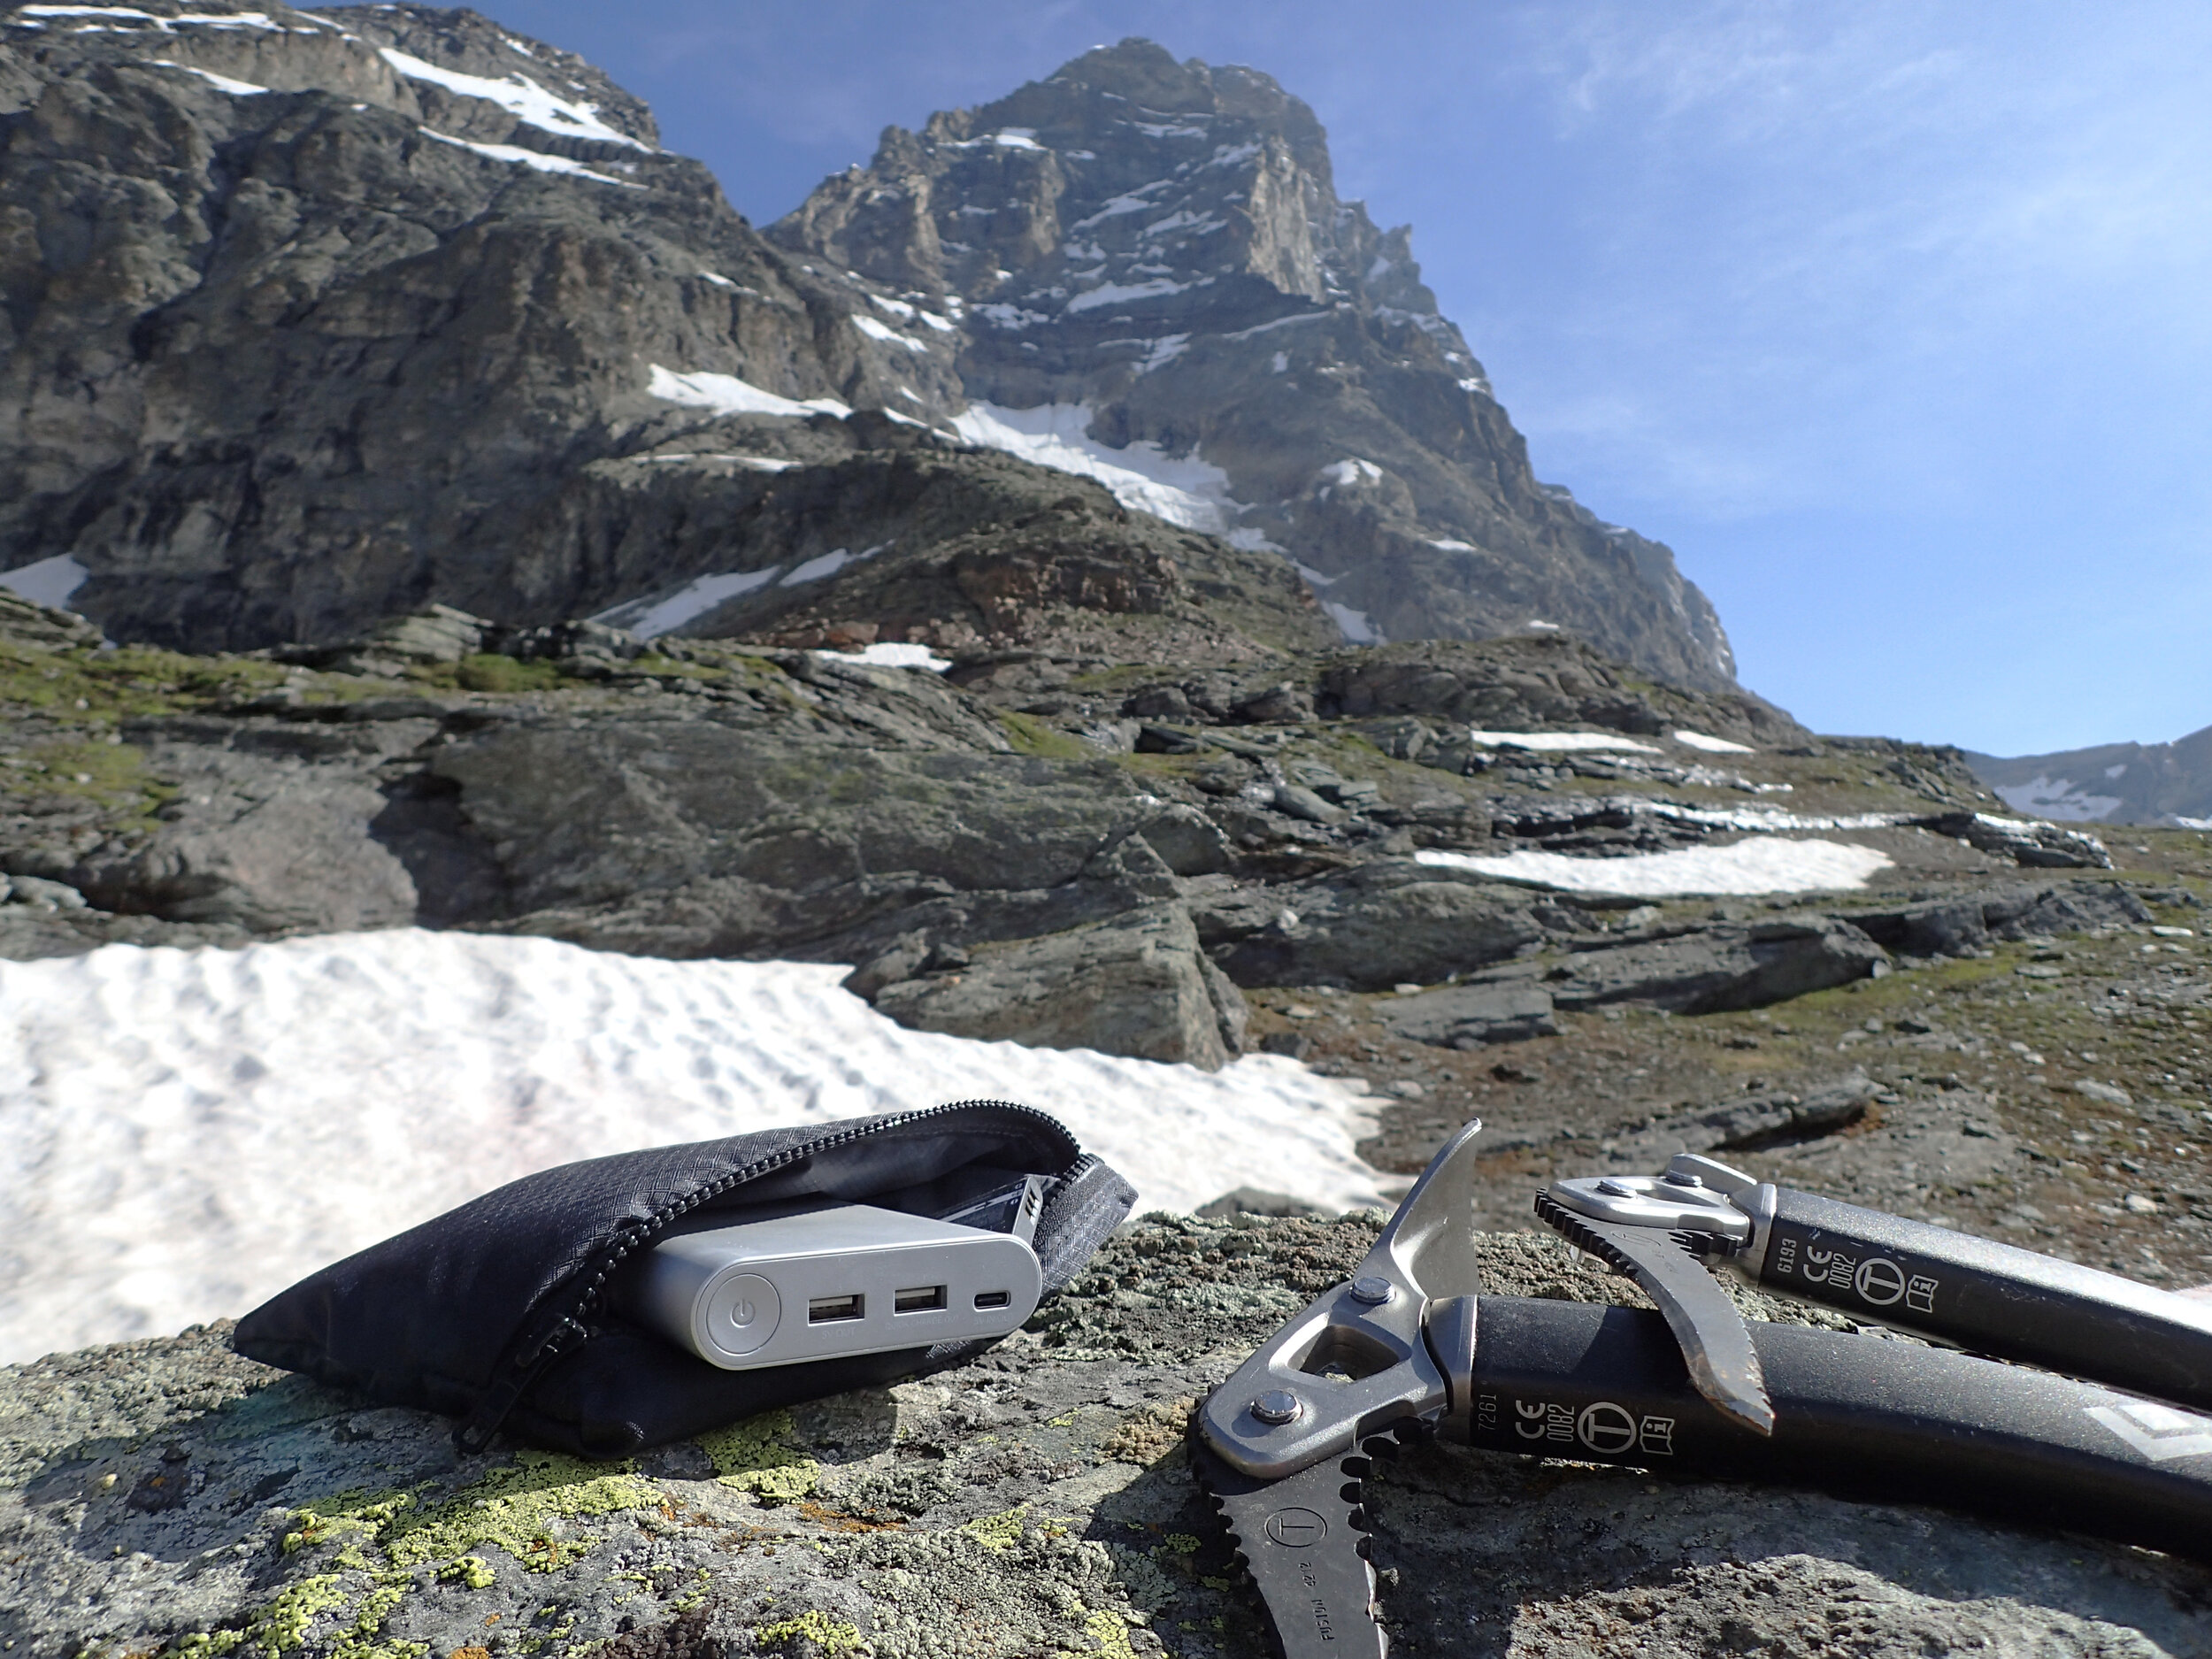 Our first space age prototype getting tested near the Matterhorn. It was destined to be a great winter phone case